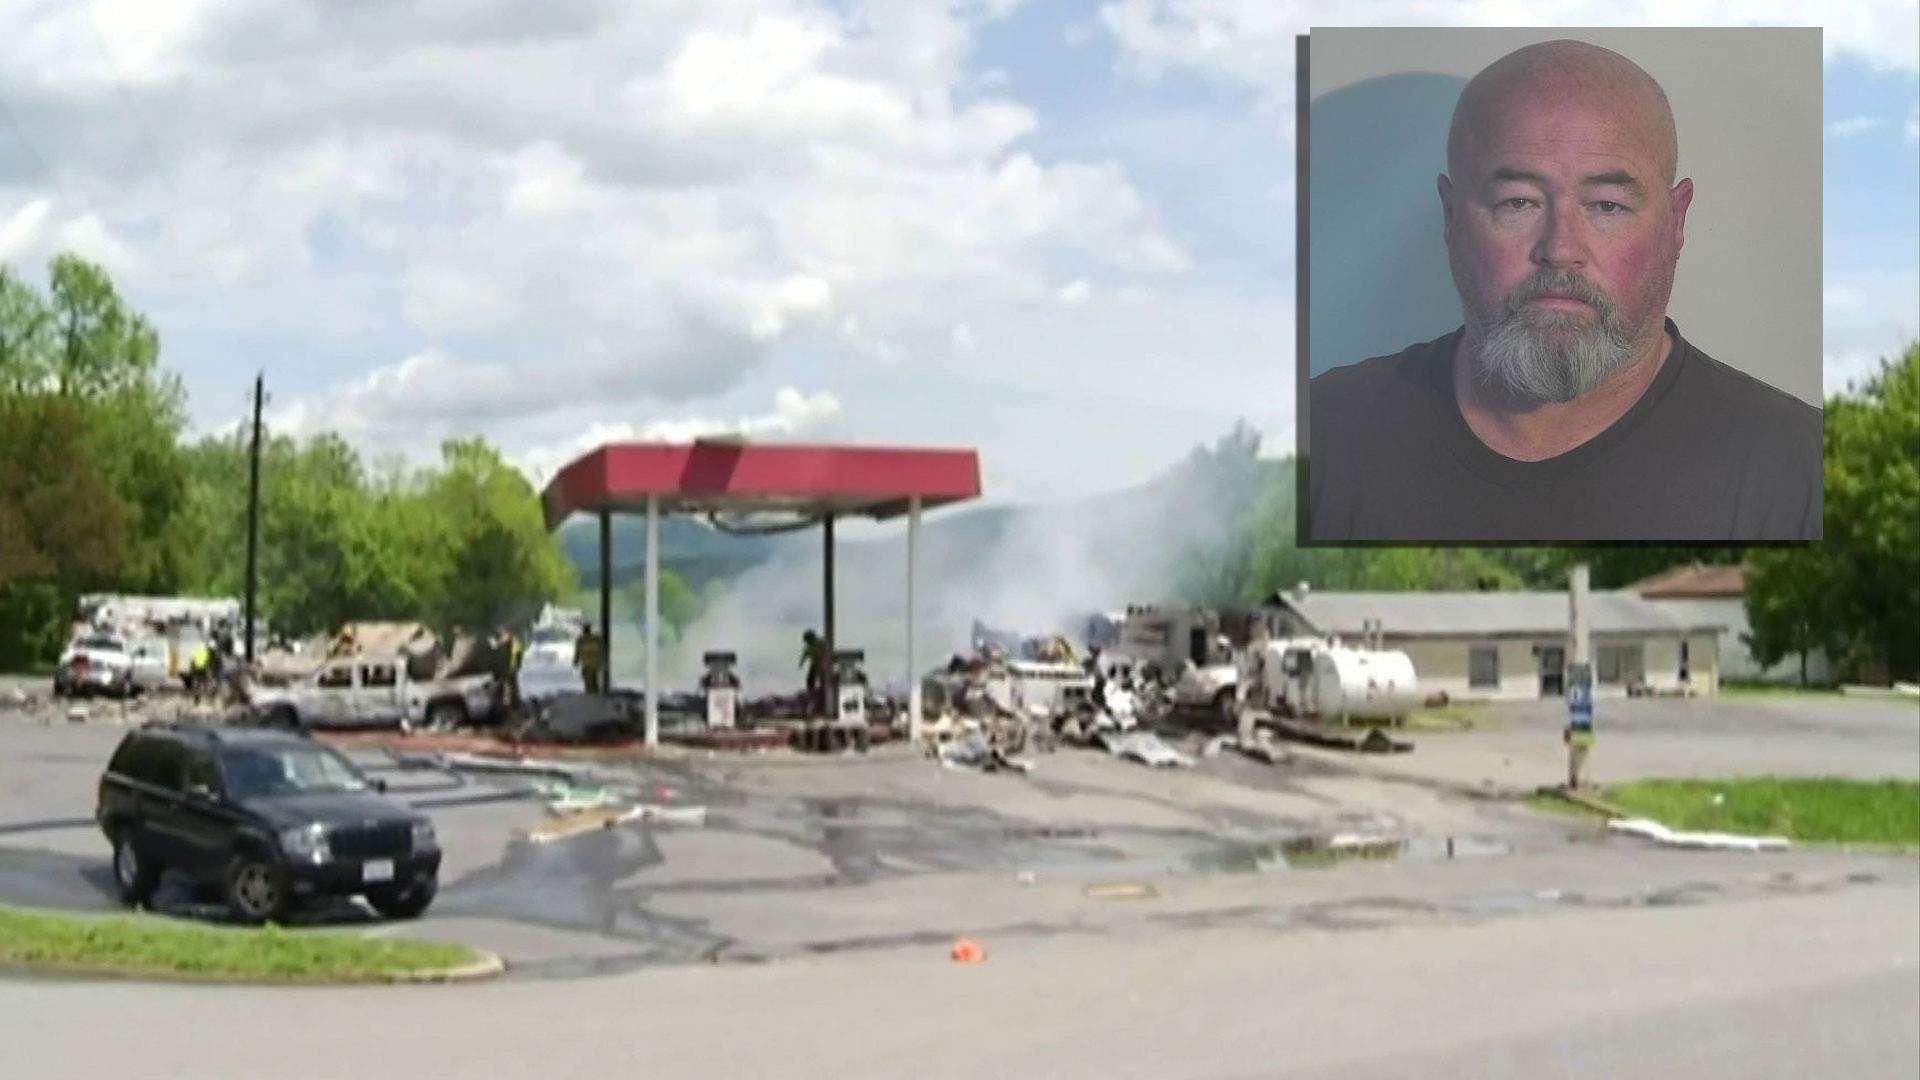 Roanoke man indicted in deadly Rockbridge County gas station explosion released on bond